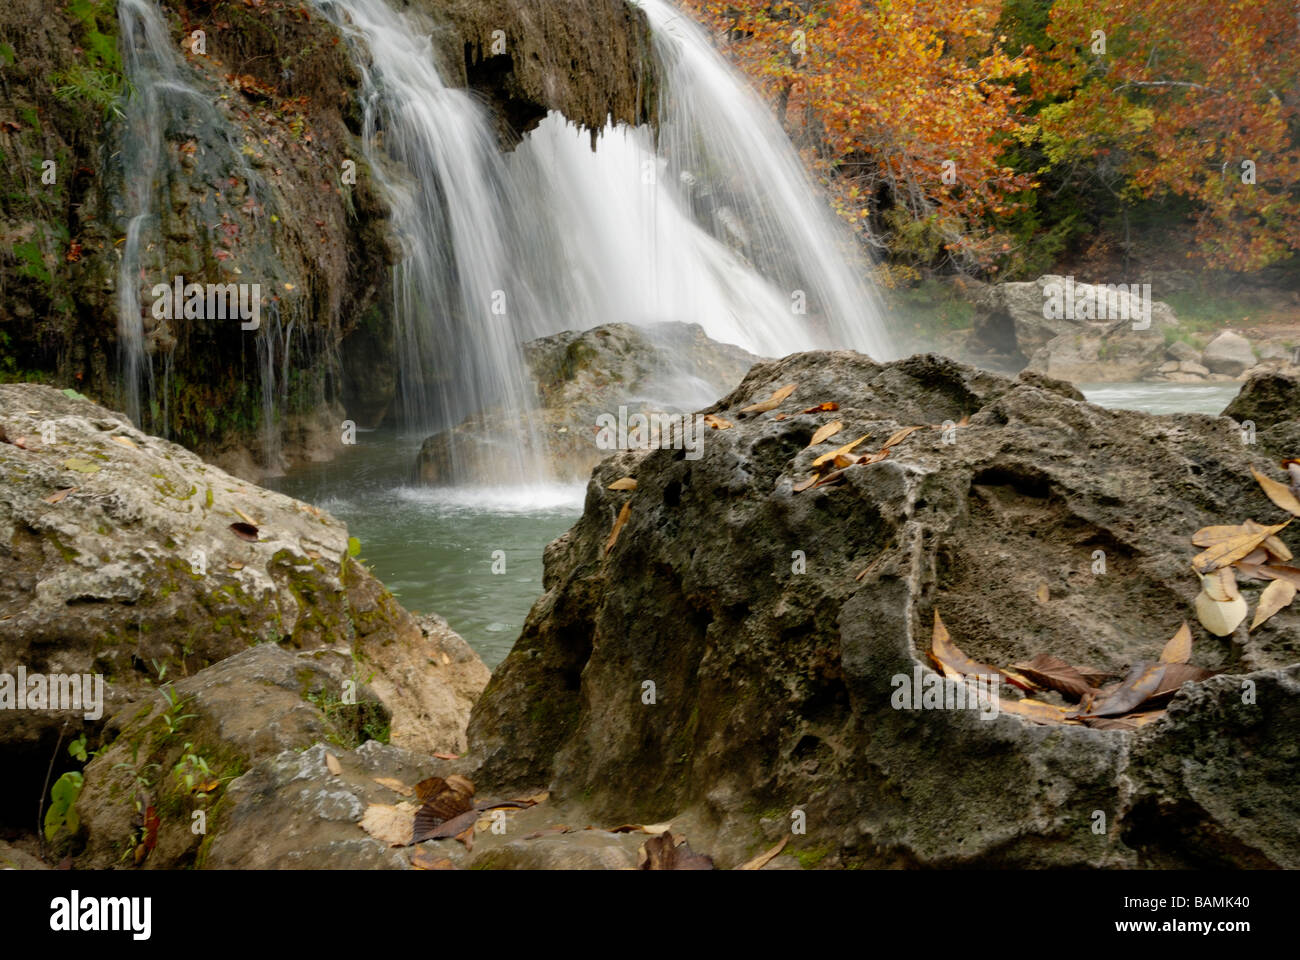 A 77-foot waterfall flows over mossy rocks at Turner Falls Park in the Arbuckle Wilderness area near Davis, Oklahoma, USA . Stock Photo